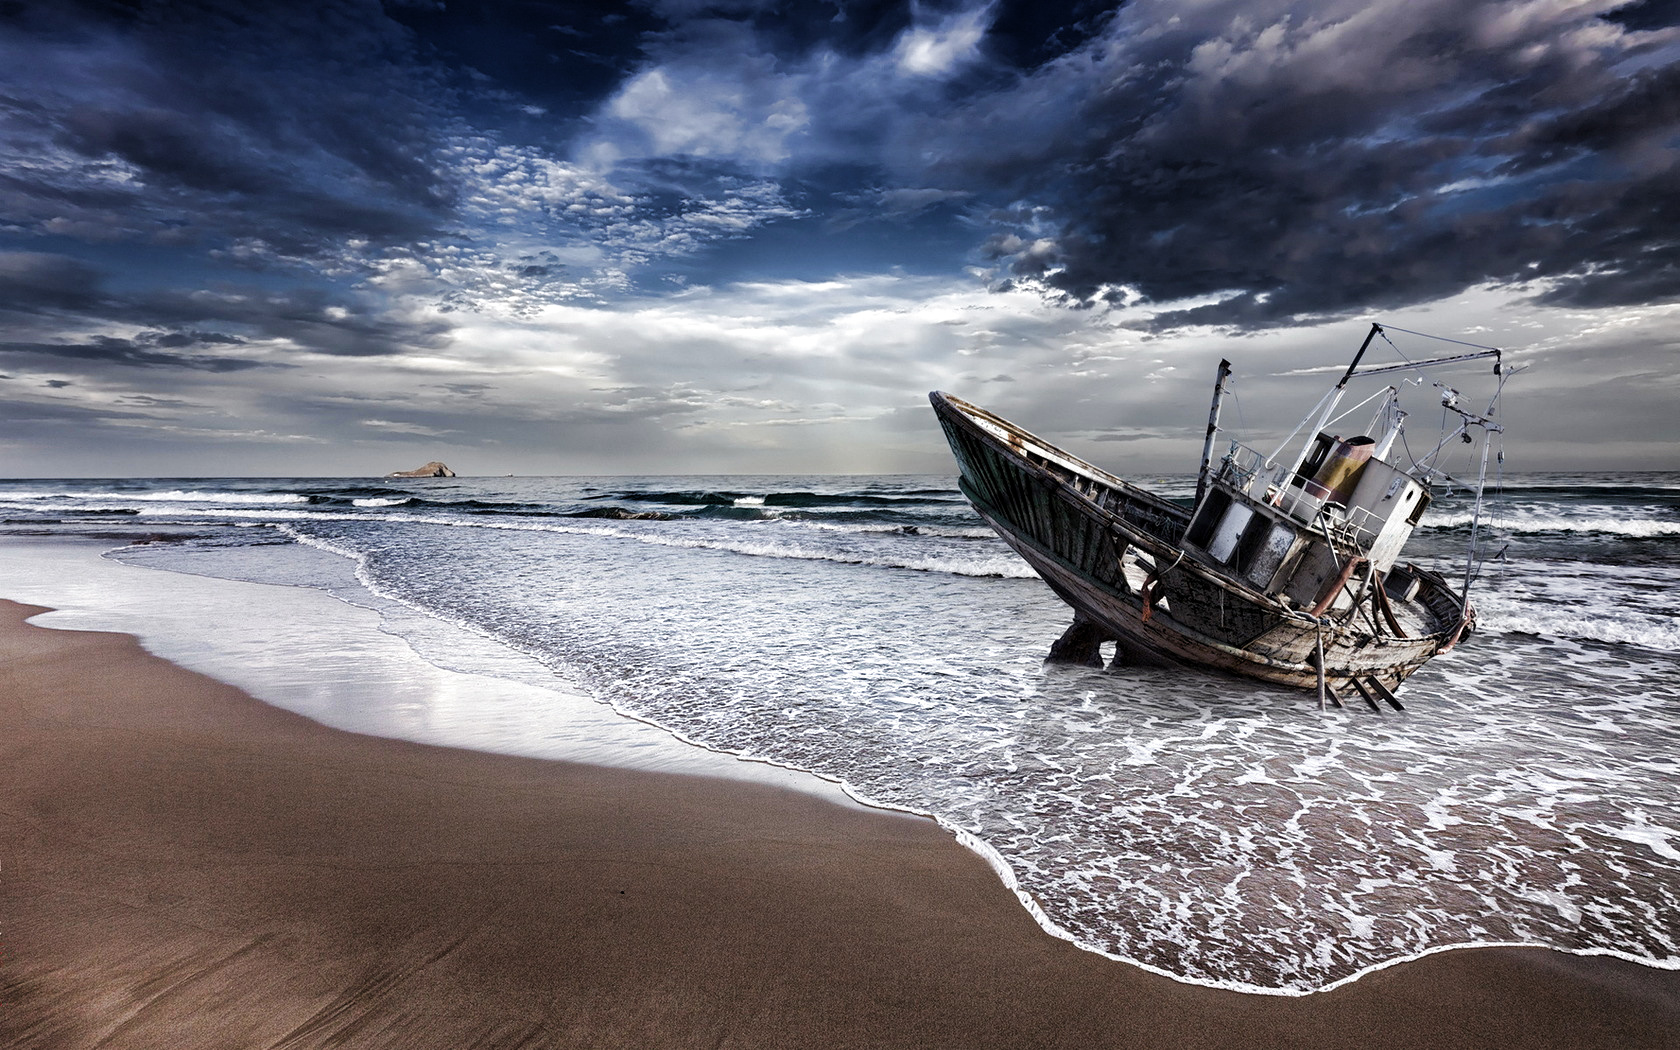 shipwreck, Decay, Ruin, Abandoned, Landscapes, Beaches, Ocean, Sand, Waves, Sky, Clouds, Mood, Hdr Wallpaper